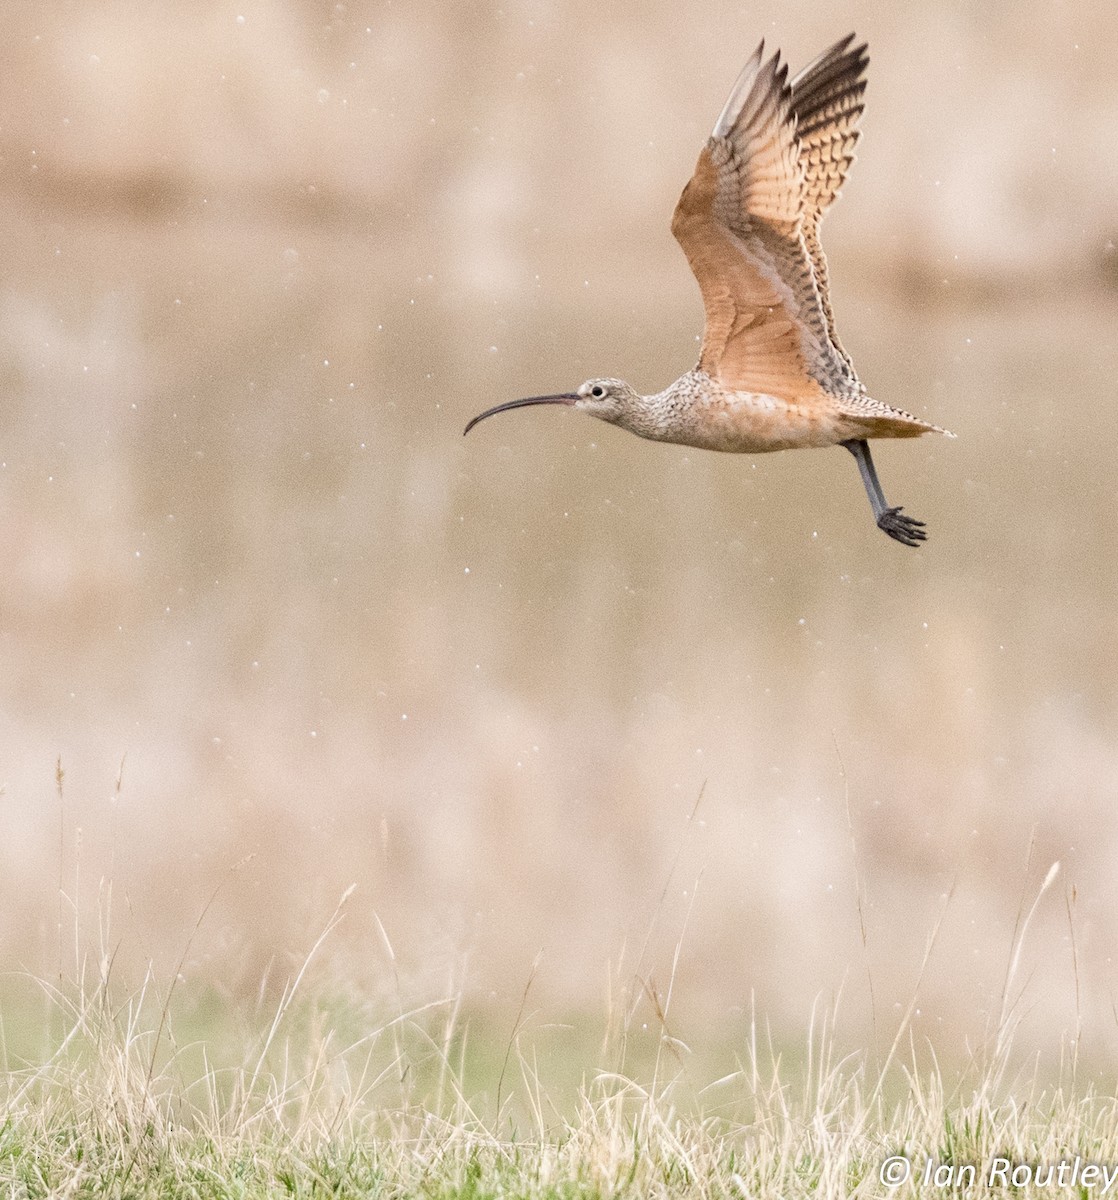 Long-billed Curlew - Ian Routley